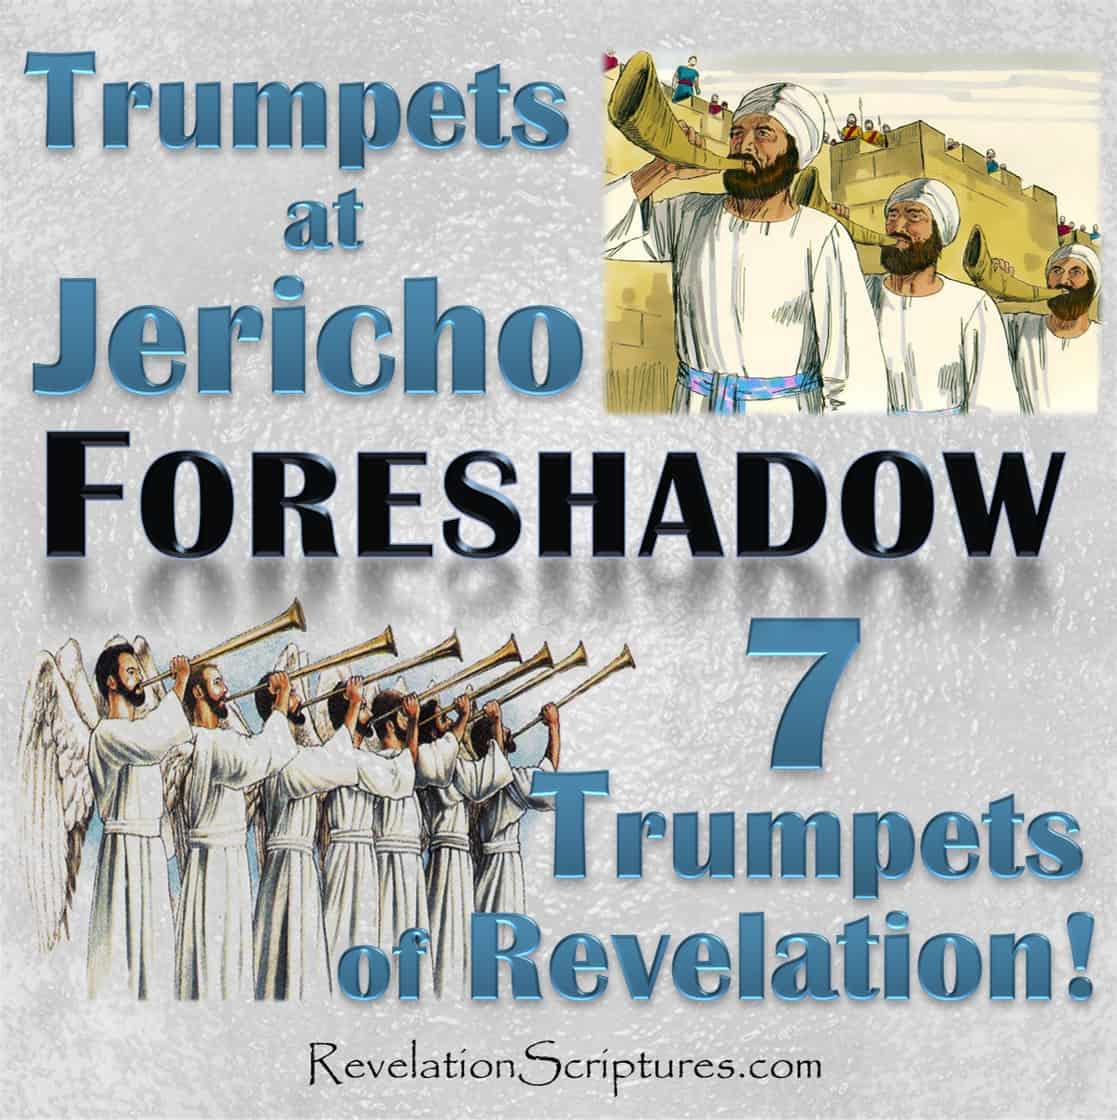 7 Trumpets of Revelation,Seven Trumpets,7th Bowl of Wrath,7th Trumpet Wrath,7th Vial of Wrath,7 Trumpets Revelation,Foreshadow,7 Trumpets Joshua,7 Trumpets, Jericho,walls came tumbling down,walls collapse,walls fell,walls crumbled,7 days,once around city,arc,arc of the covenant,shout,blast,7th day,7 times around city,march around city,7th Trumpet,cities of the nations fell,cities of the nations collapse,mega earthquake,mega quake